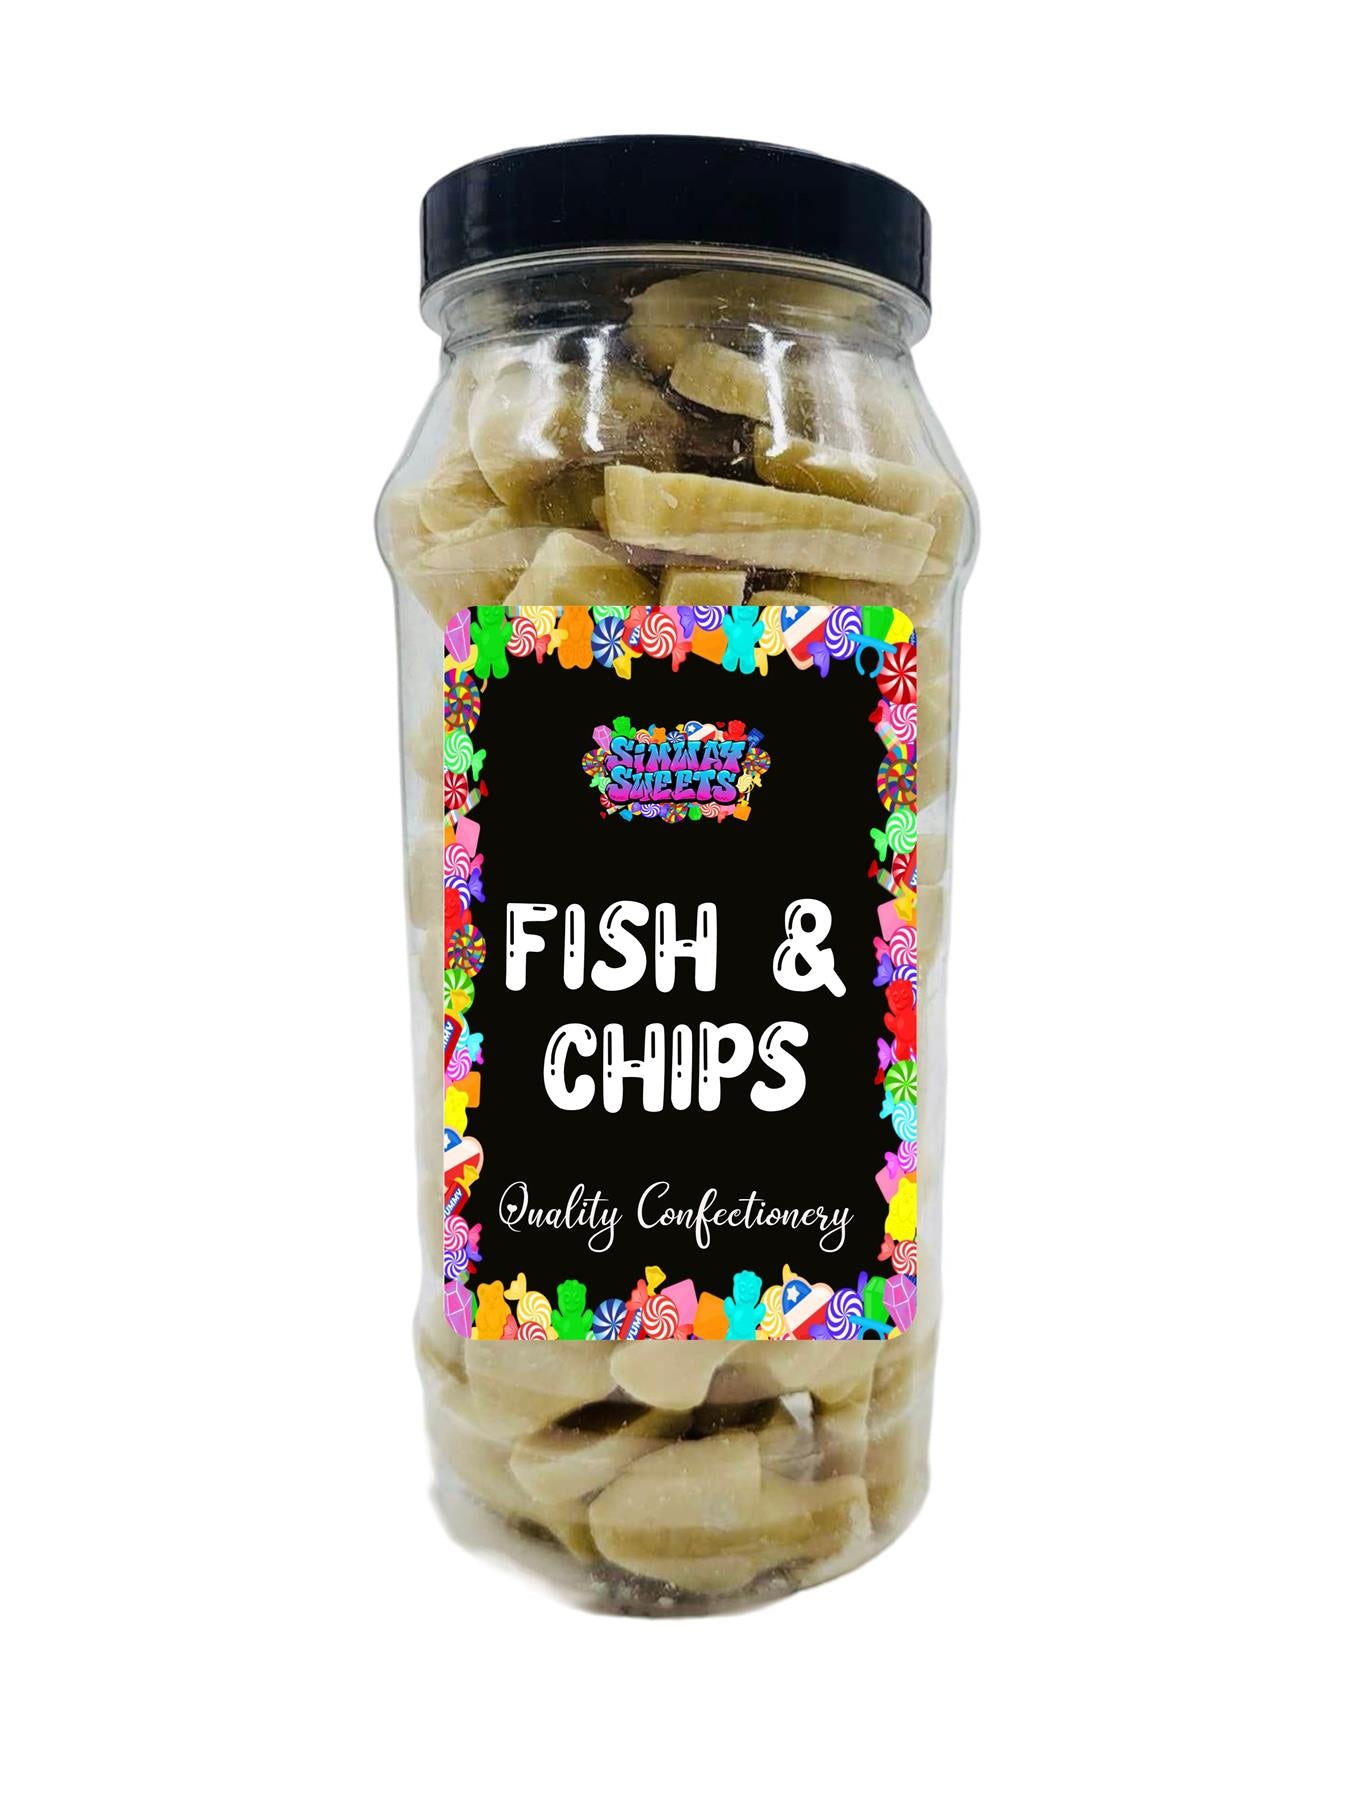 White Chocolate Fish & Chips Shapes Retro Sweets Gift Jar - 600g